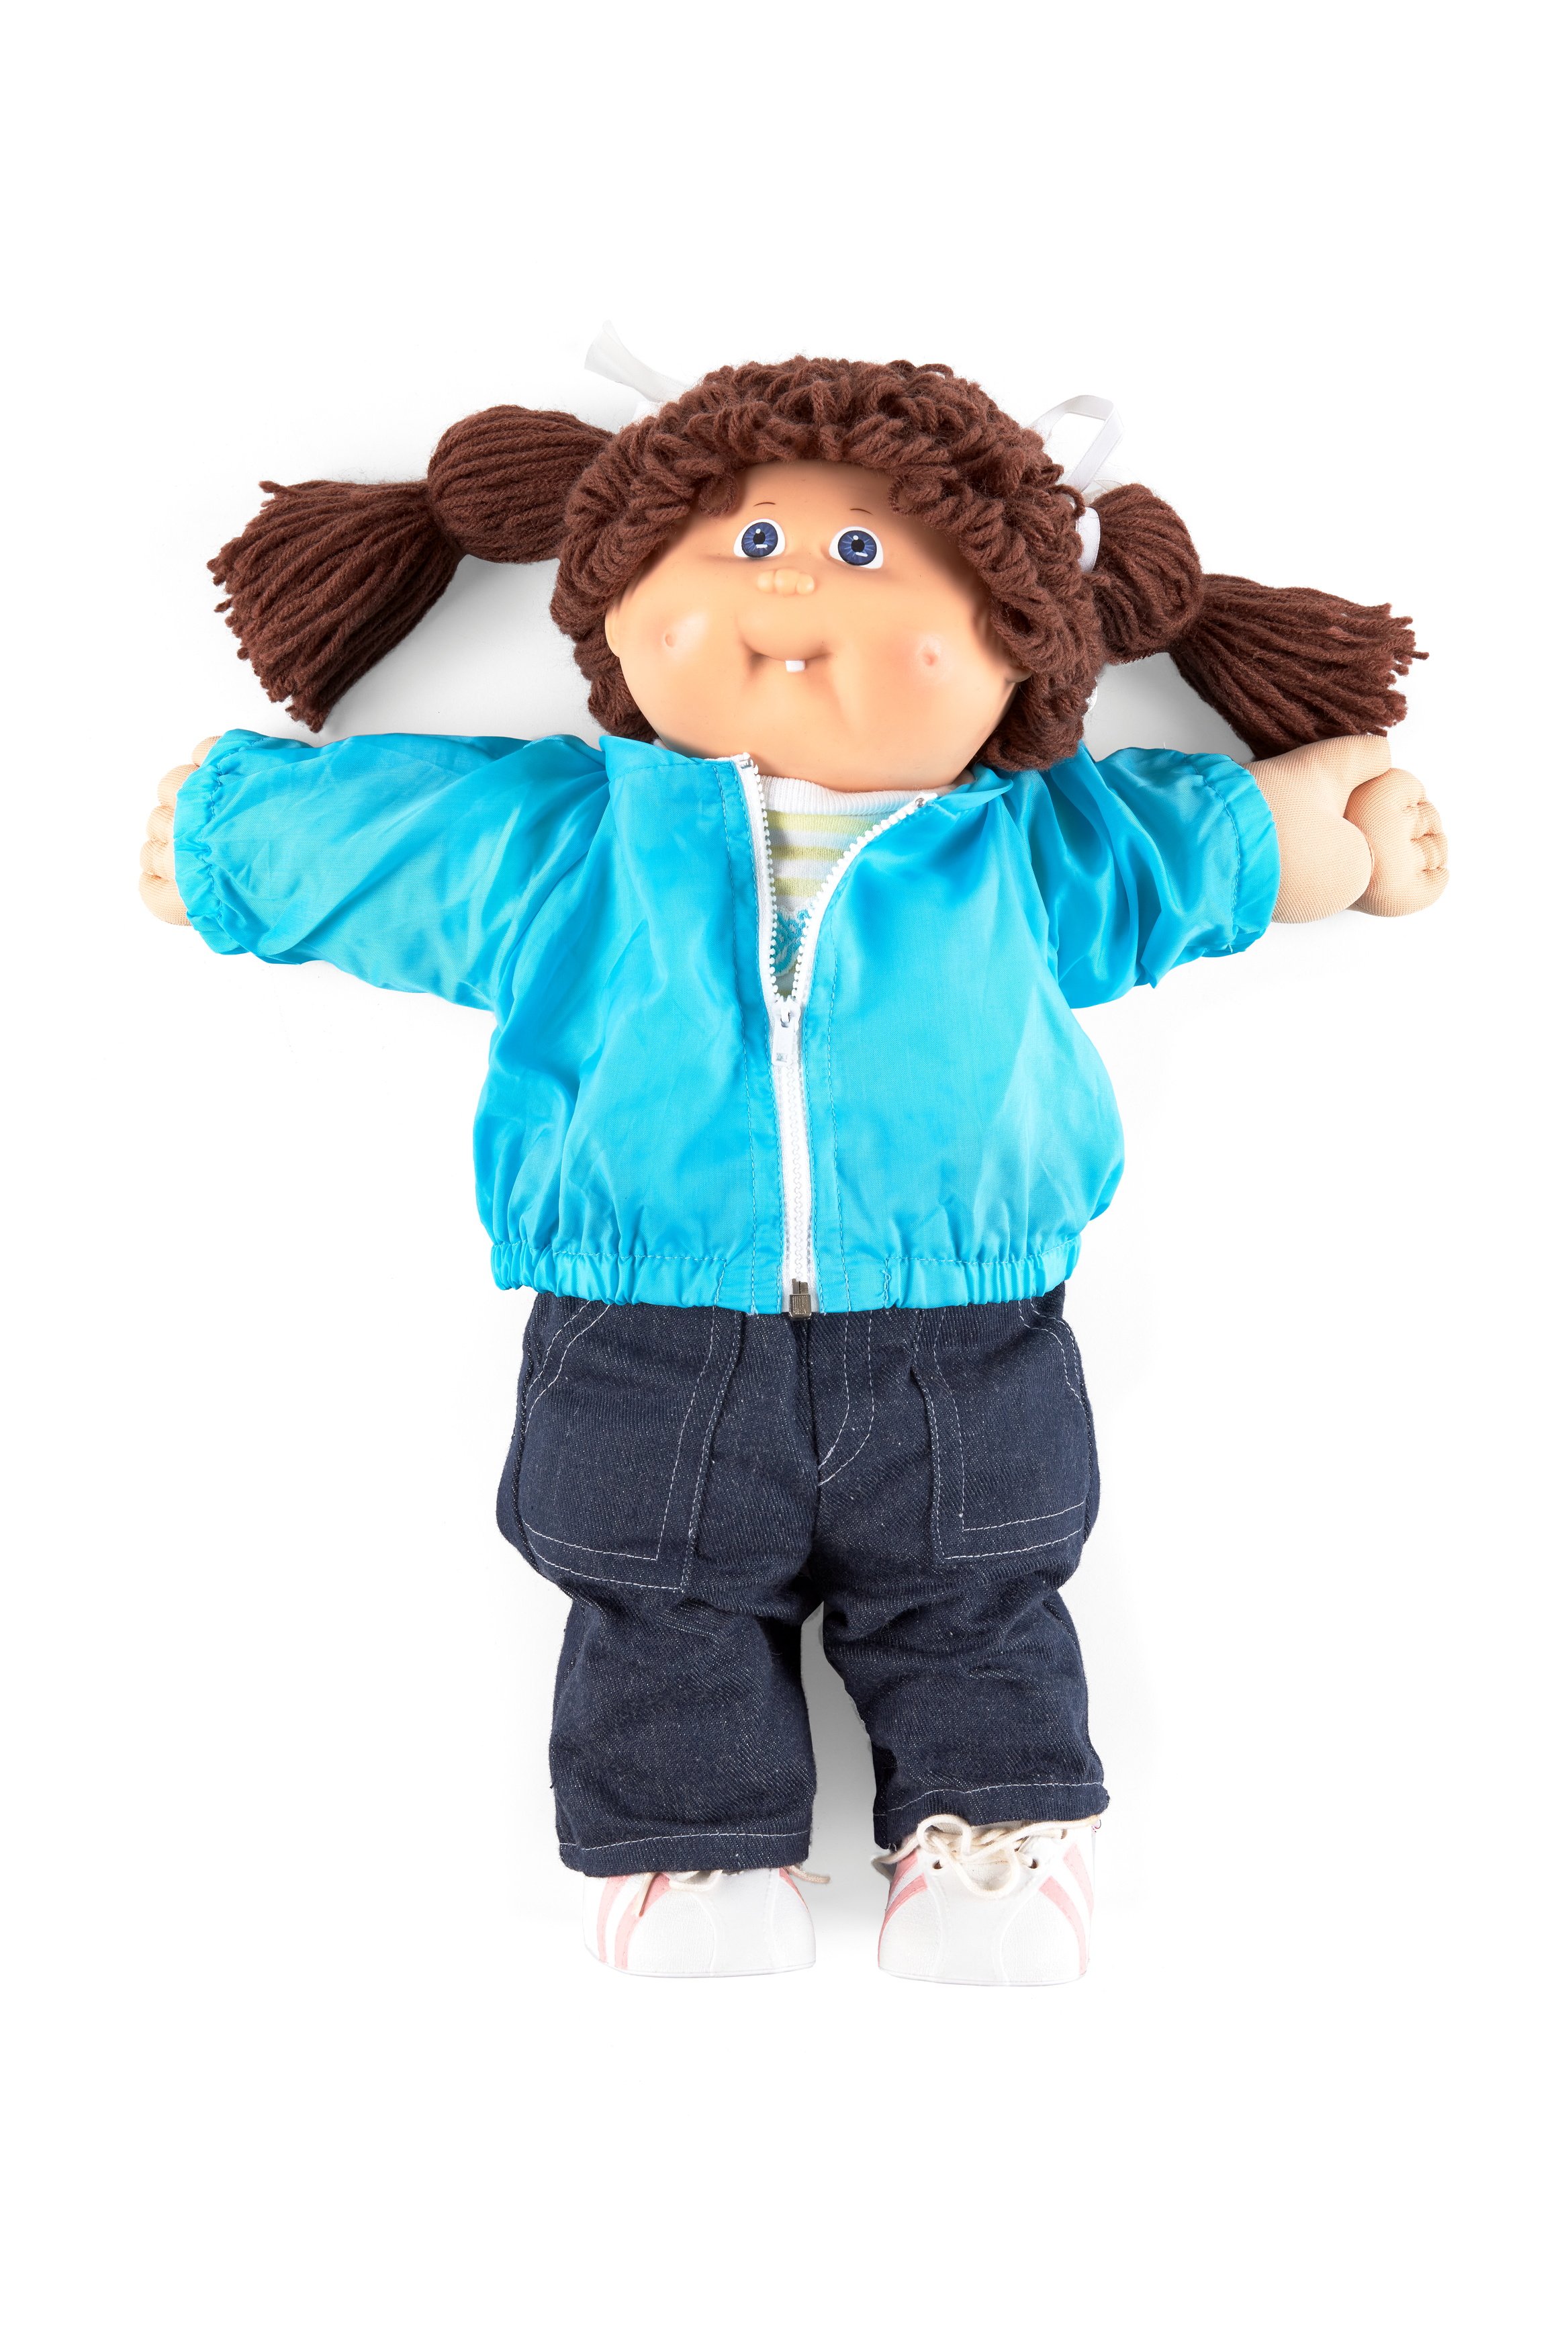 'Cabbage Patch Kid' doll byToltoys